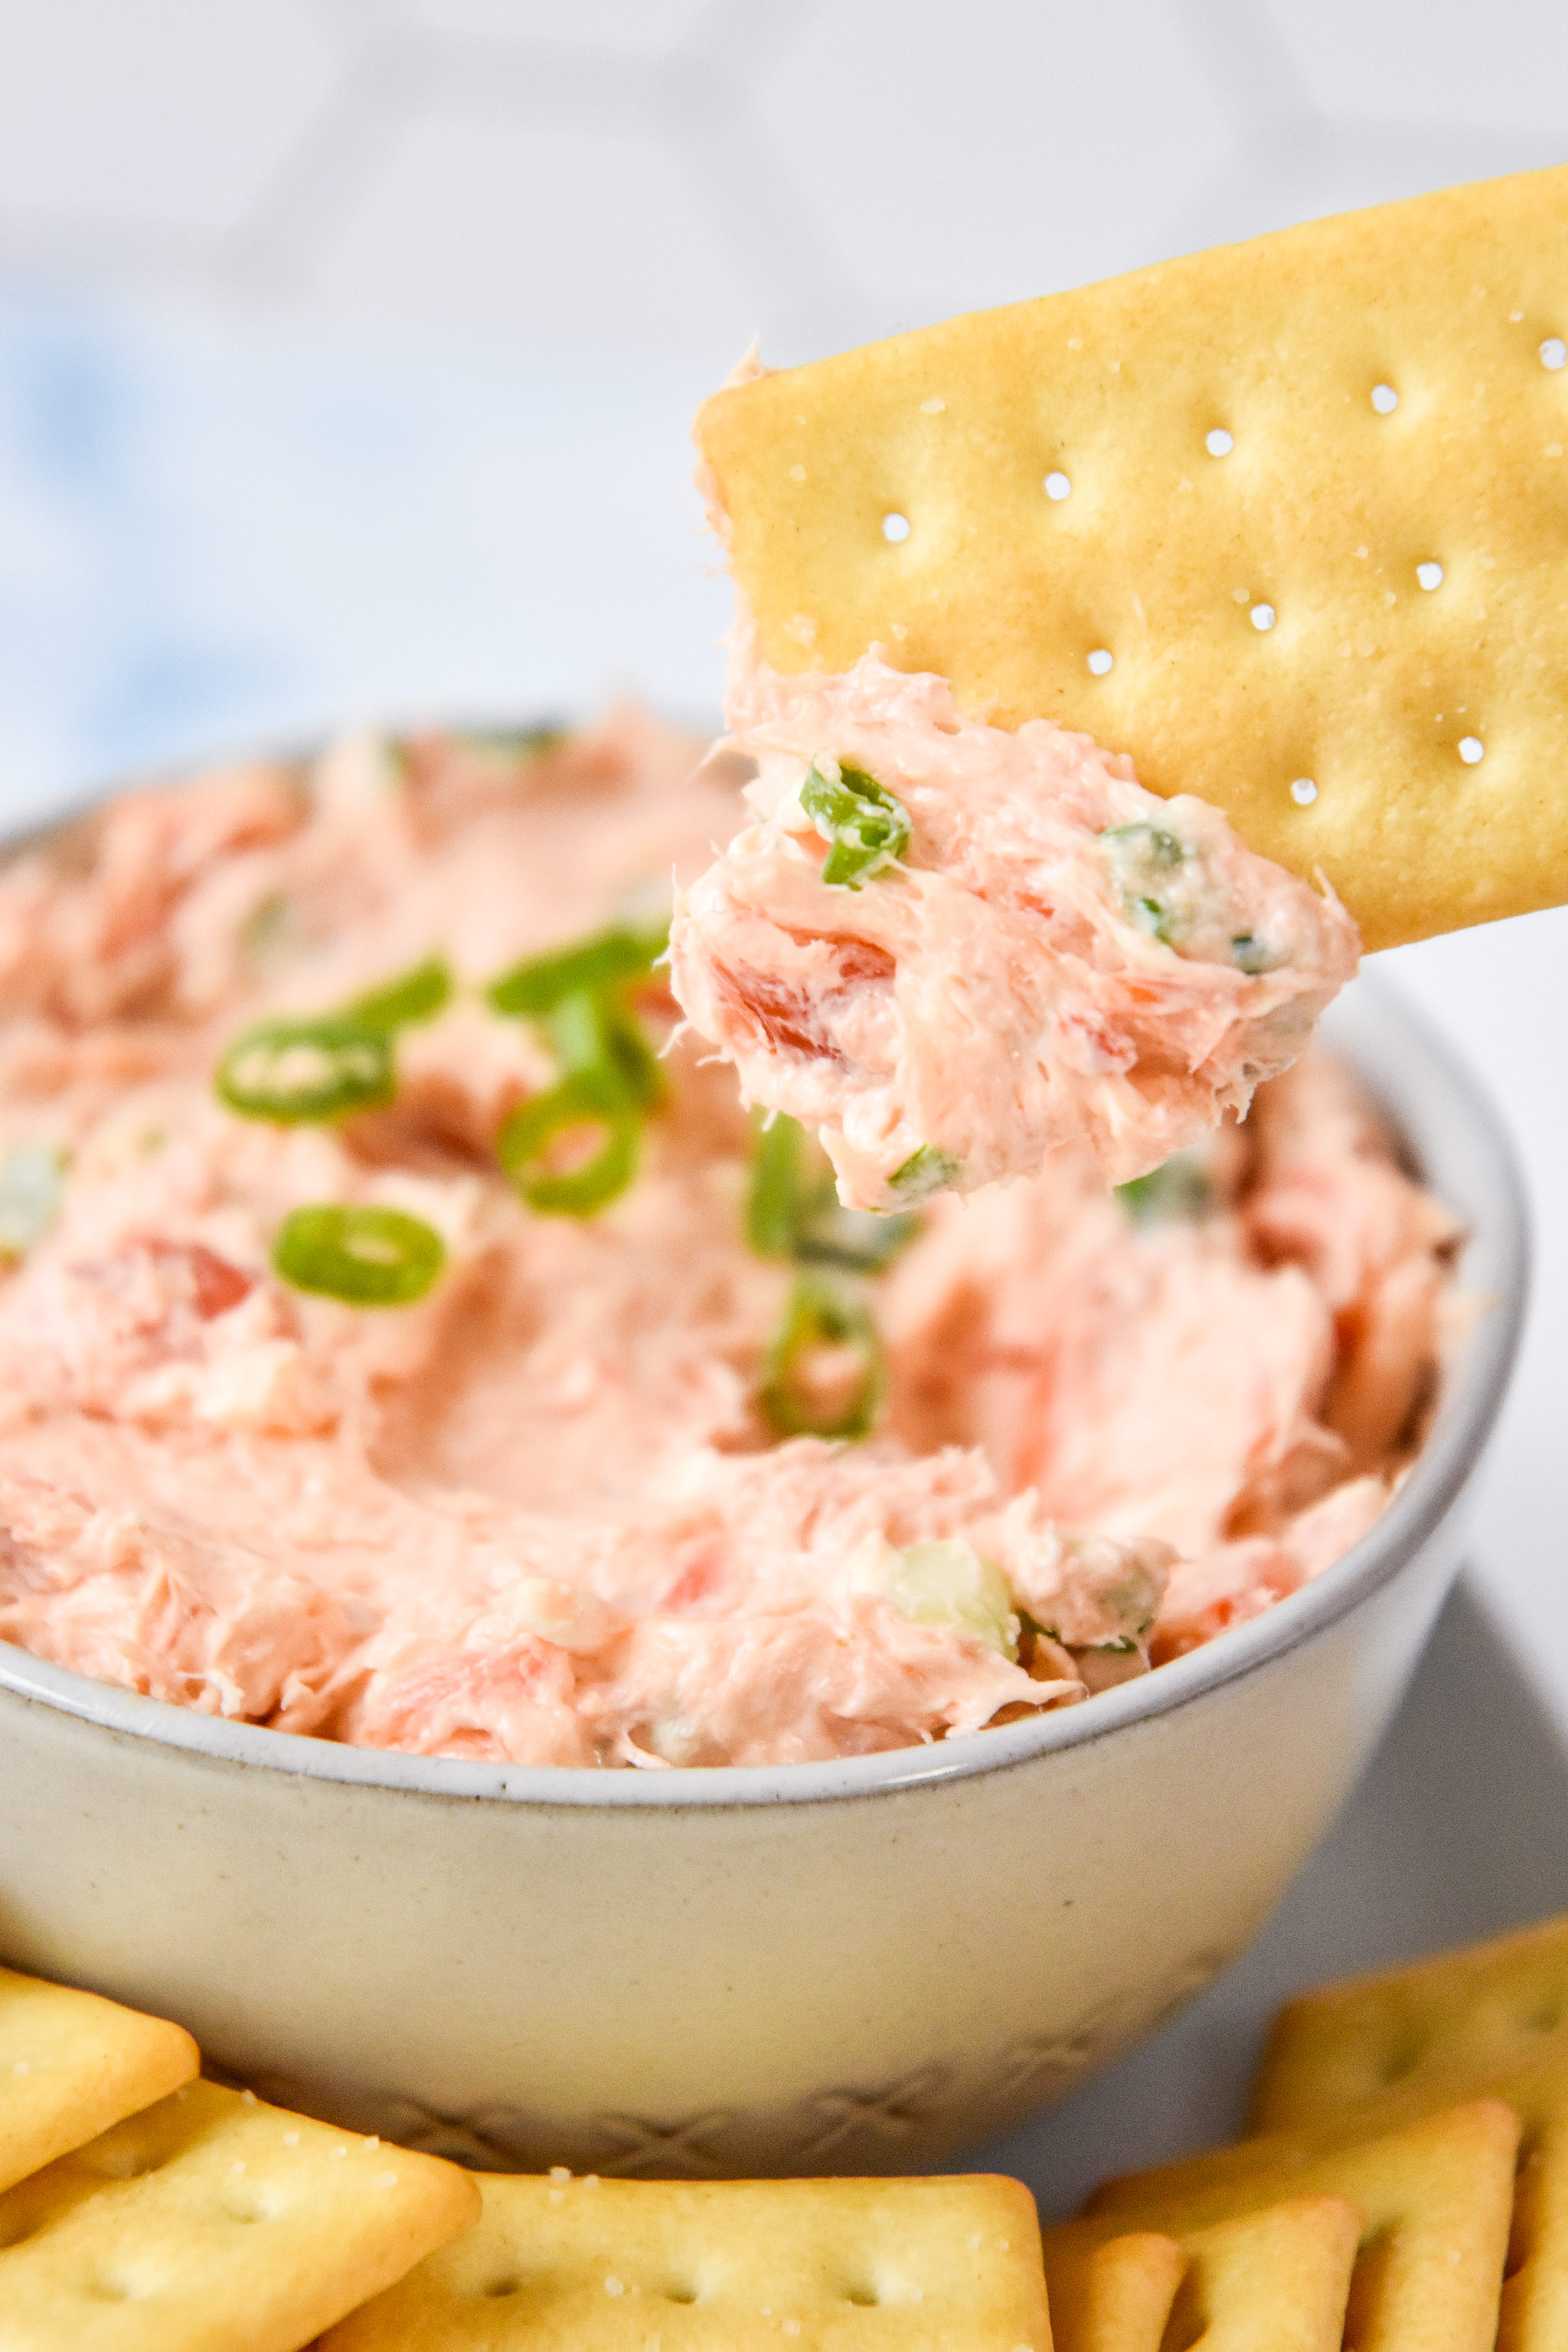 dipping a cracker into the smoked salmon dip.